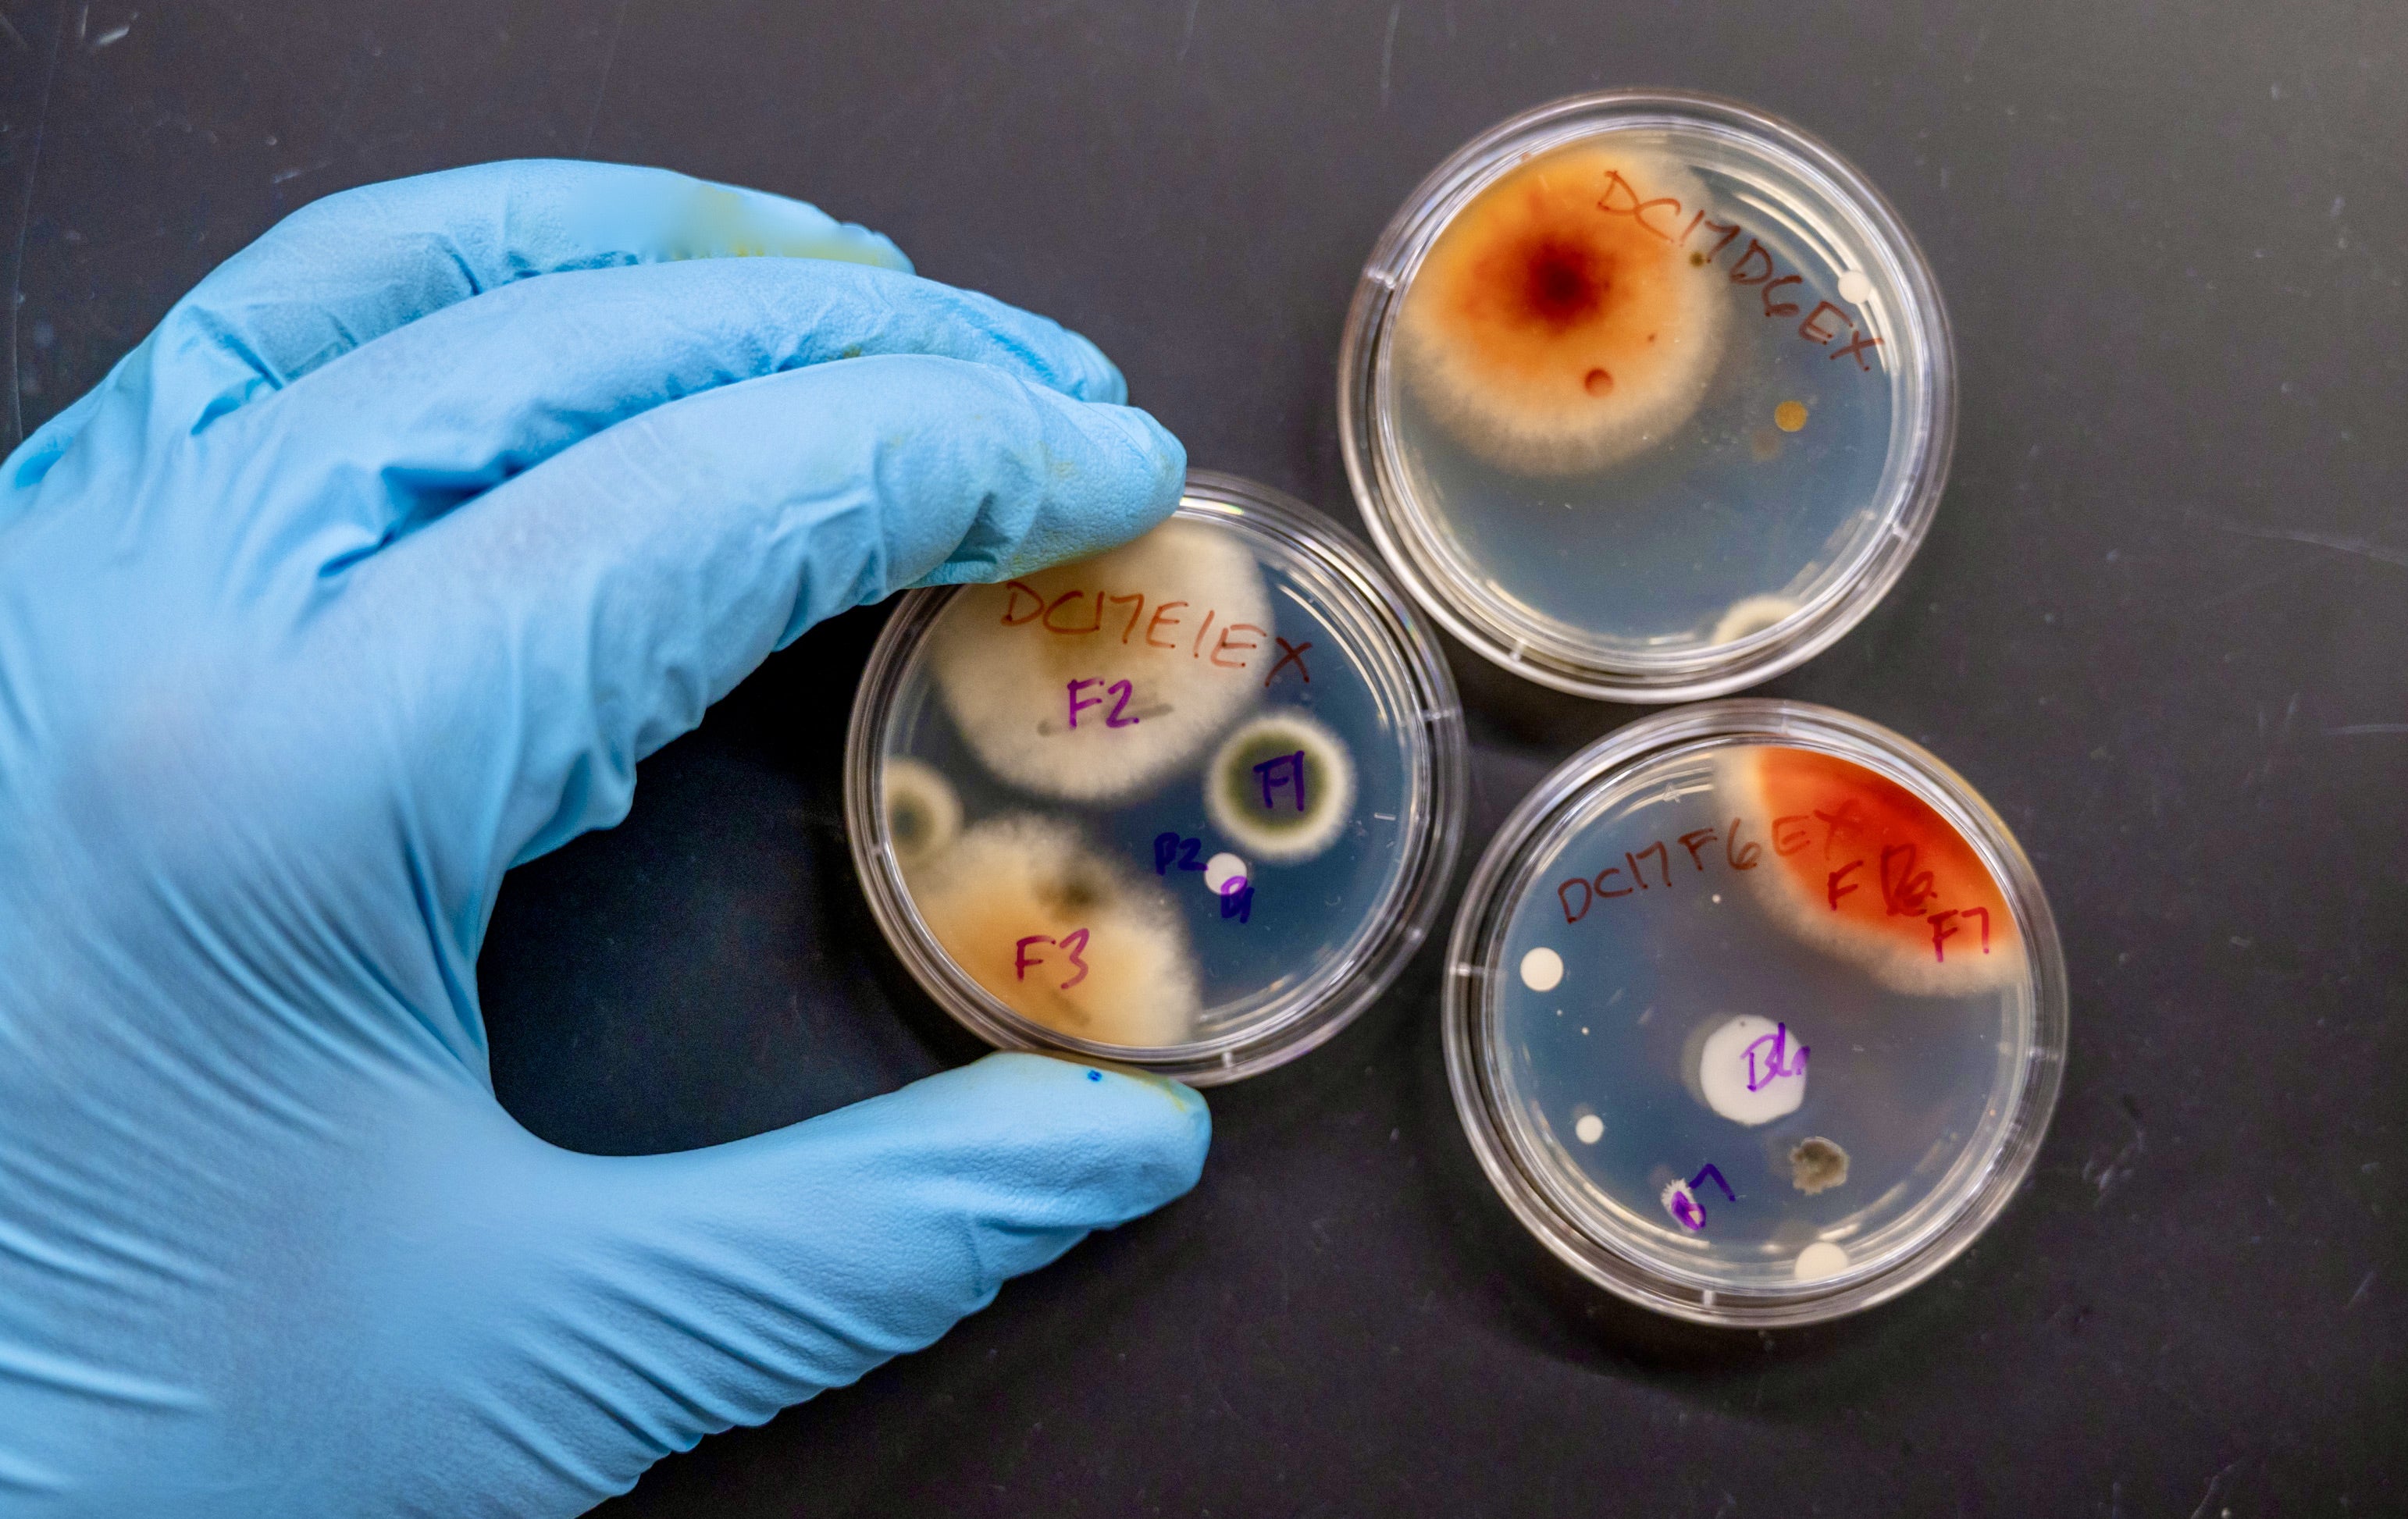 A gloved hand holds specimens in a petri dish